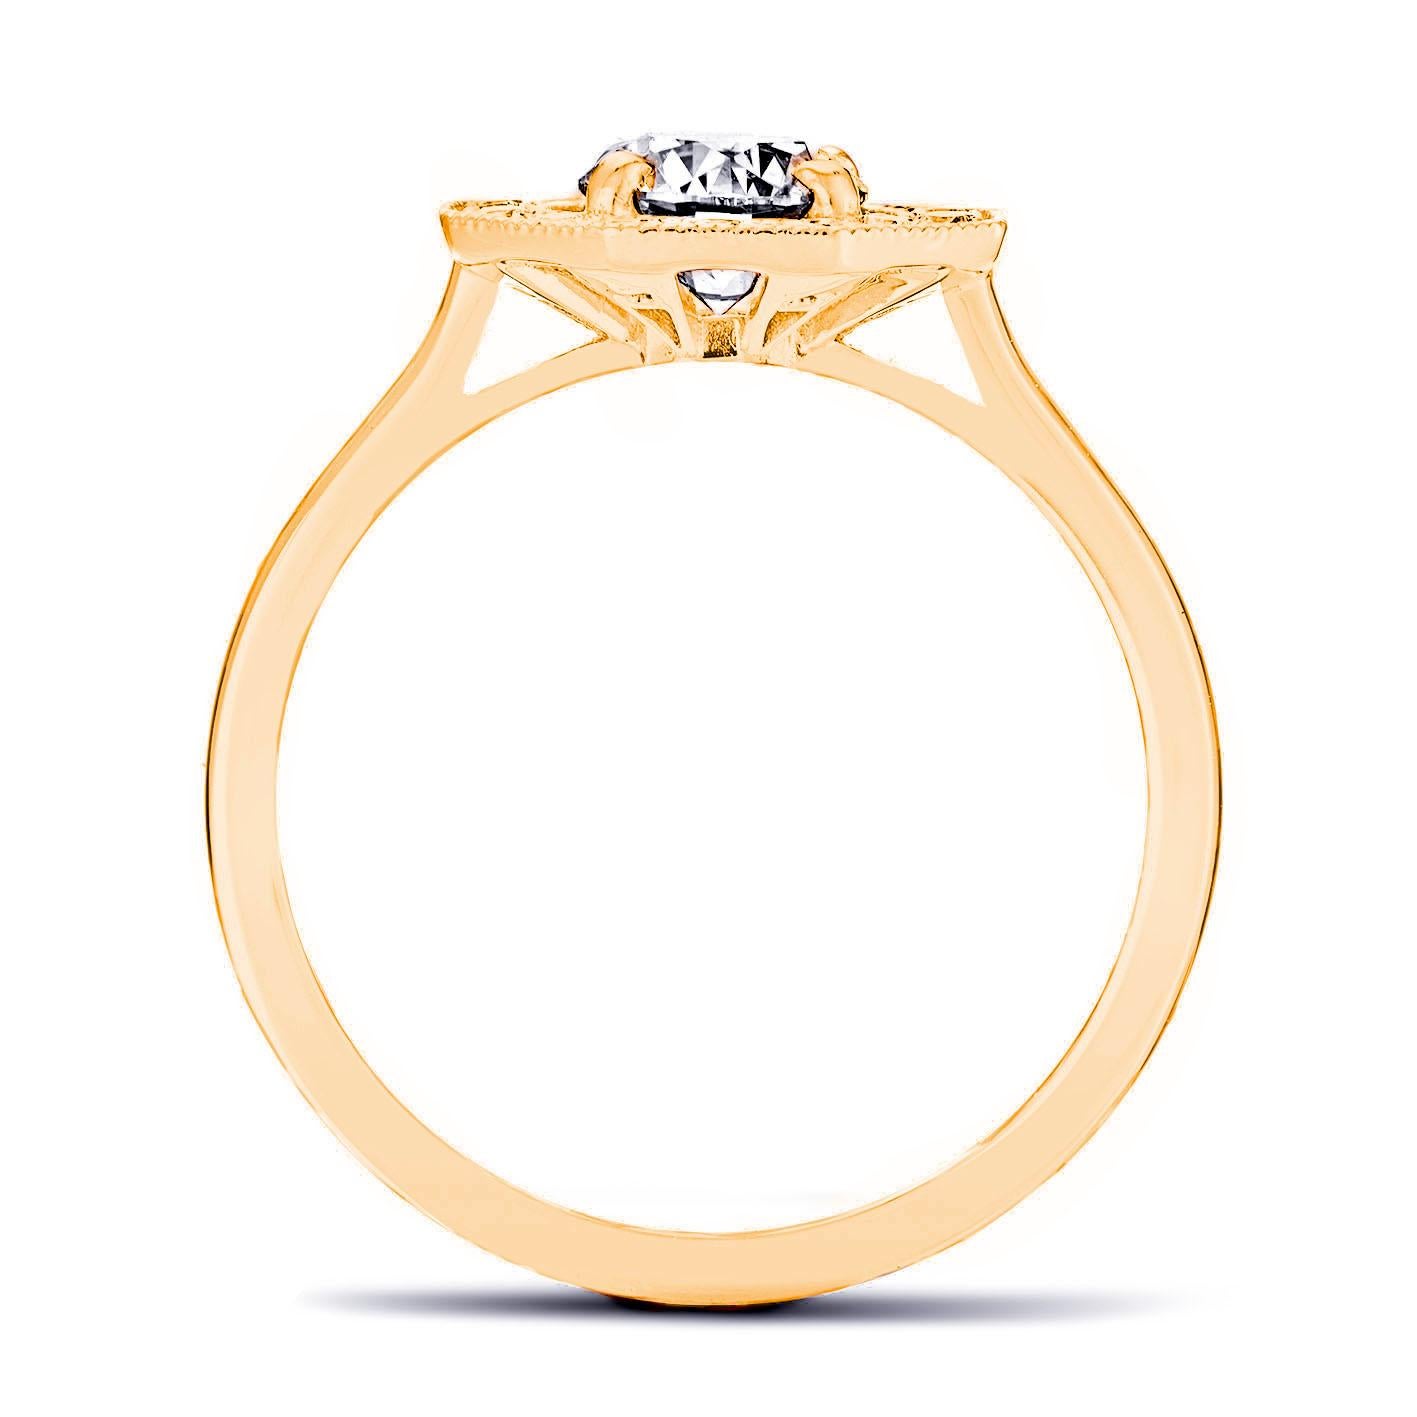 For Sale:  18k Yellow Gold Art Deco Style Ring 0.7 Ct Brilliant Cut Diamond and 0.15 Cts 2